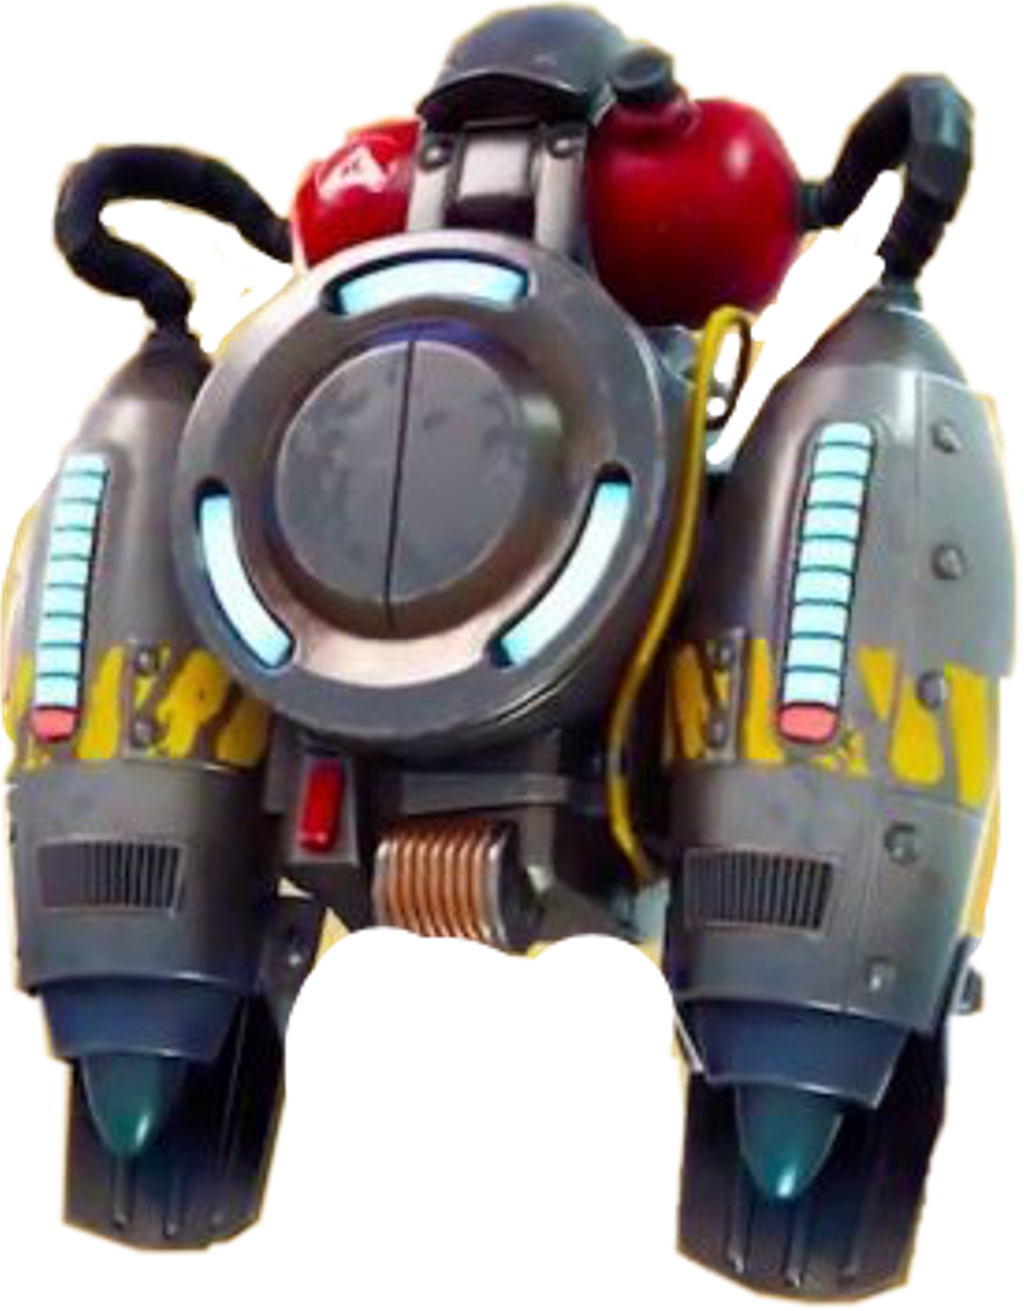 Jetpack Hd Png Fortnite Download Jetpack Sticker Weapons In Unvaulted Fortnite Png Image With No Background Pngkey Com